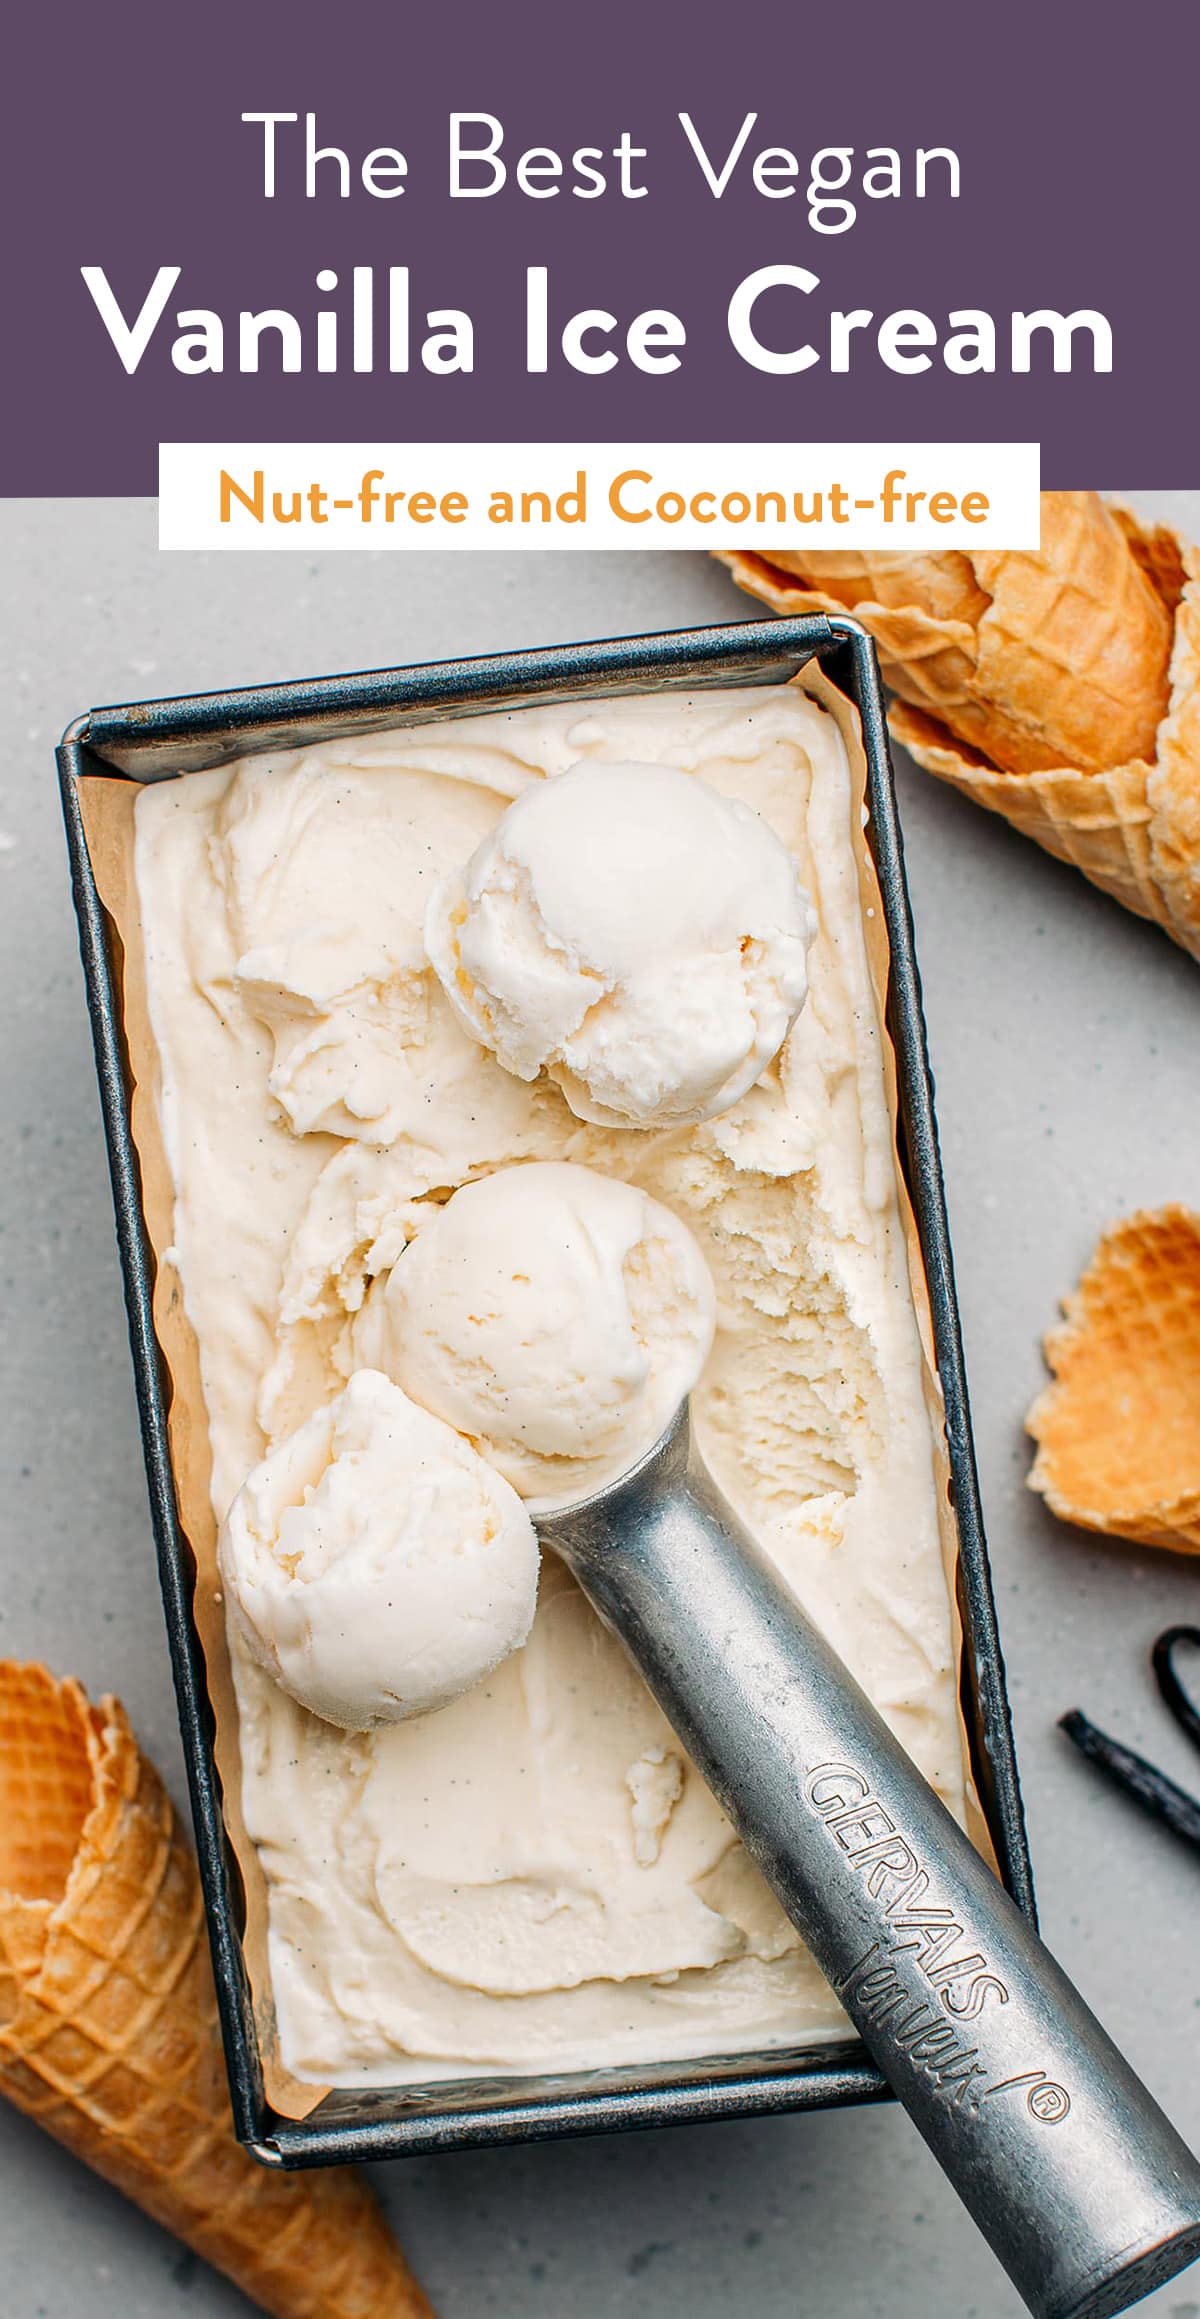 Introducing the BEST vegan vanilla ice cream! This plant-based ice cream is irresistibly creamy, infused with plenty of fresh vanilla flavor, and has nothing to envy from its dairy counterpart. Nut-free and coconut-free! #icecream #vegan #dairyfree